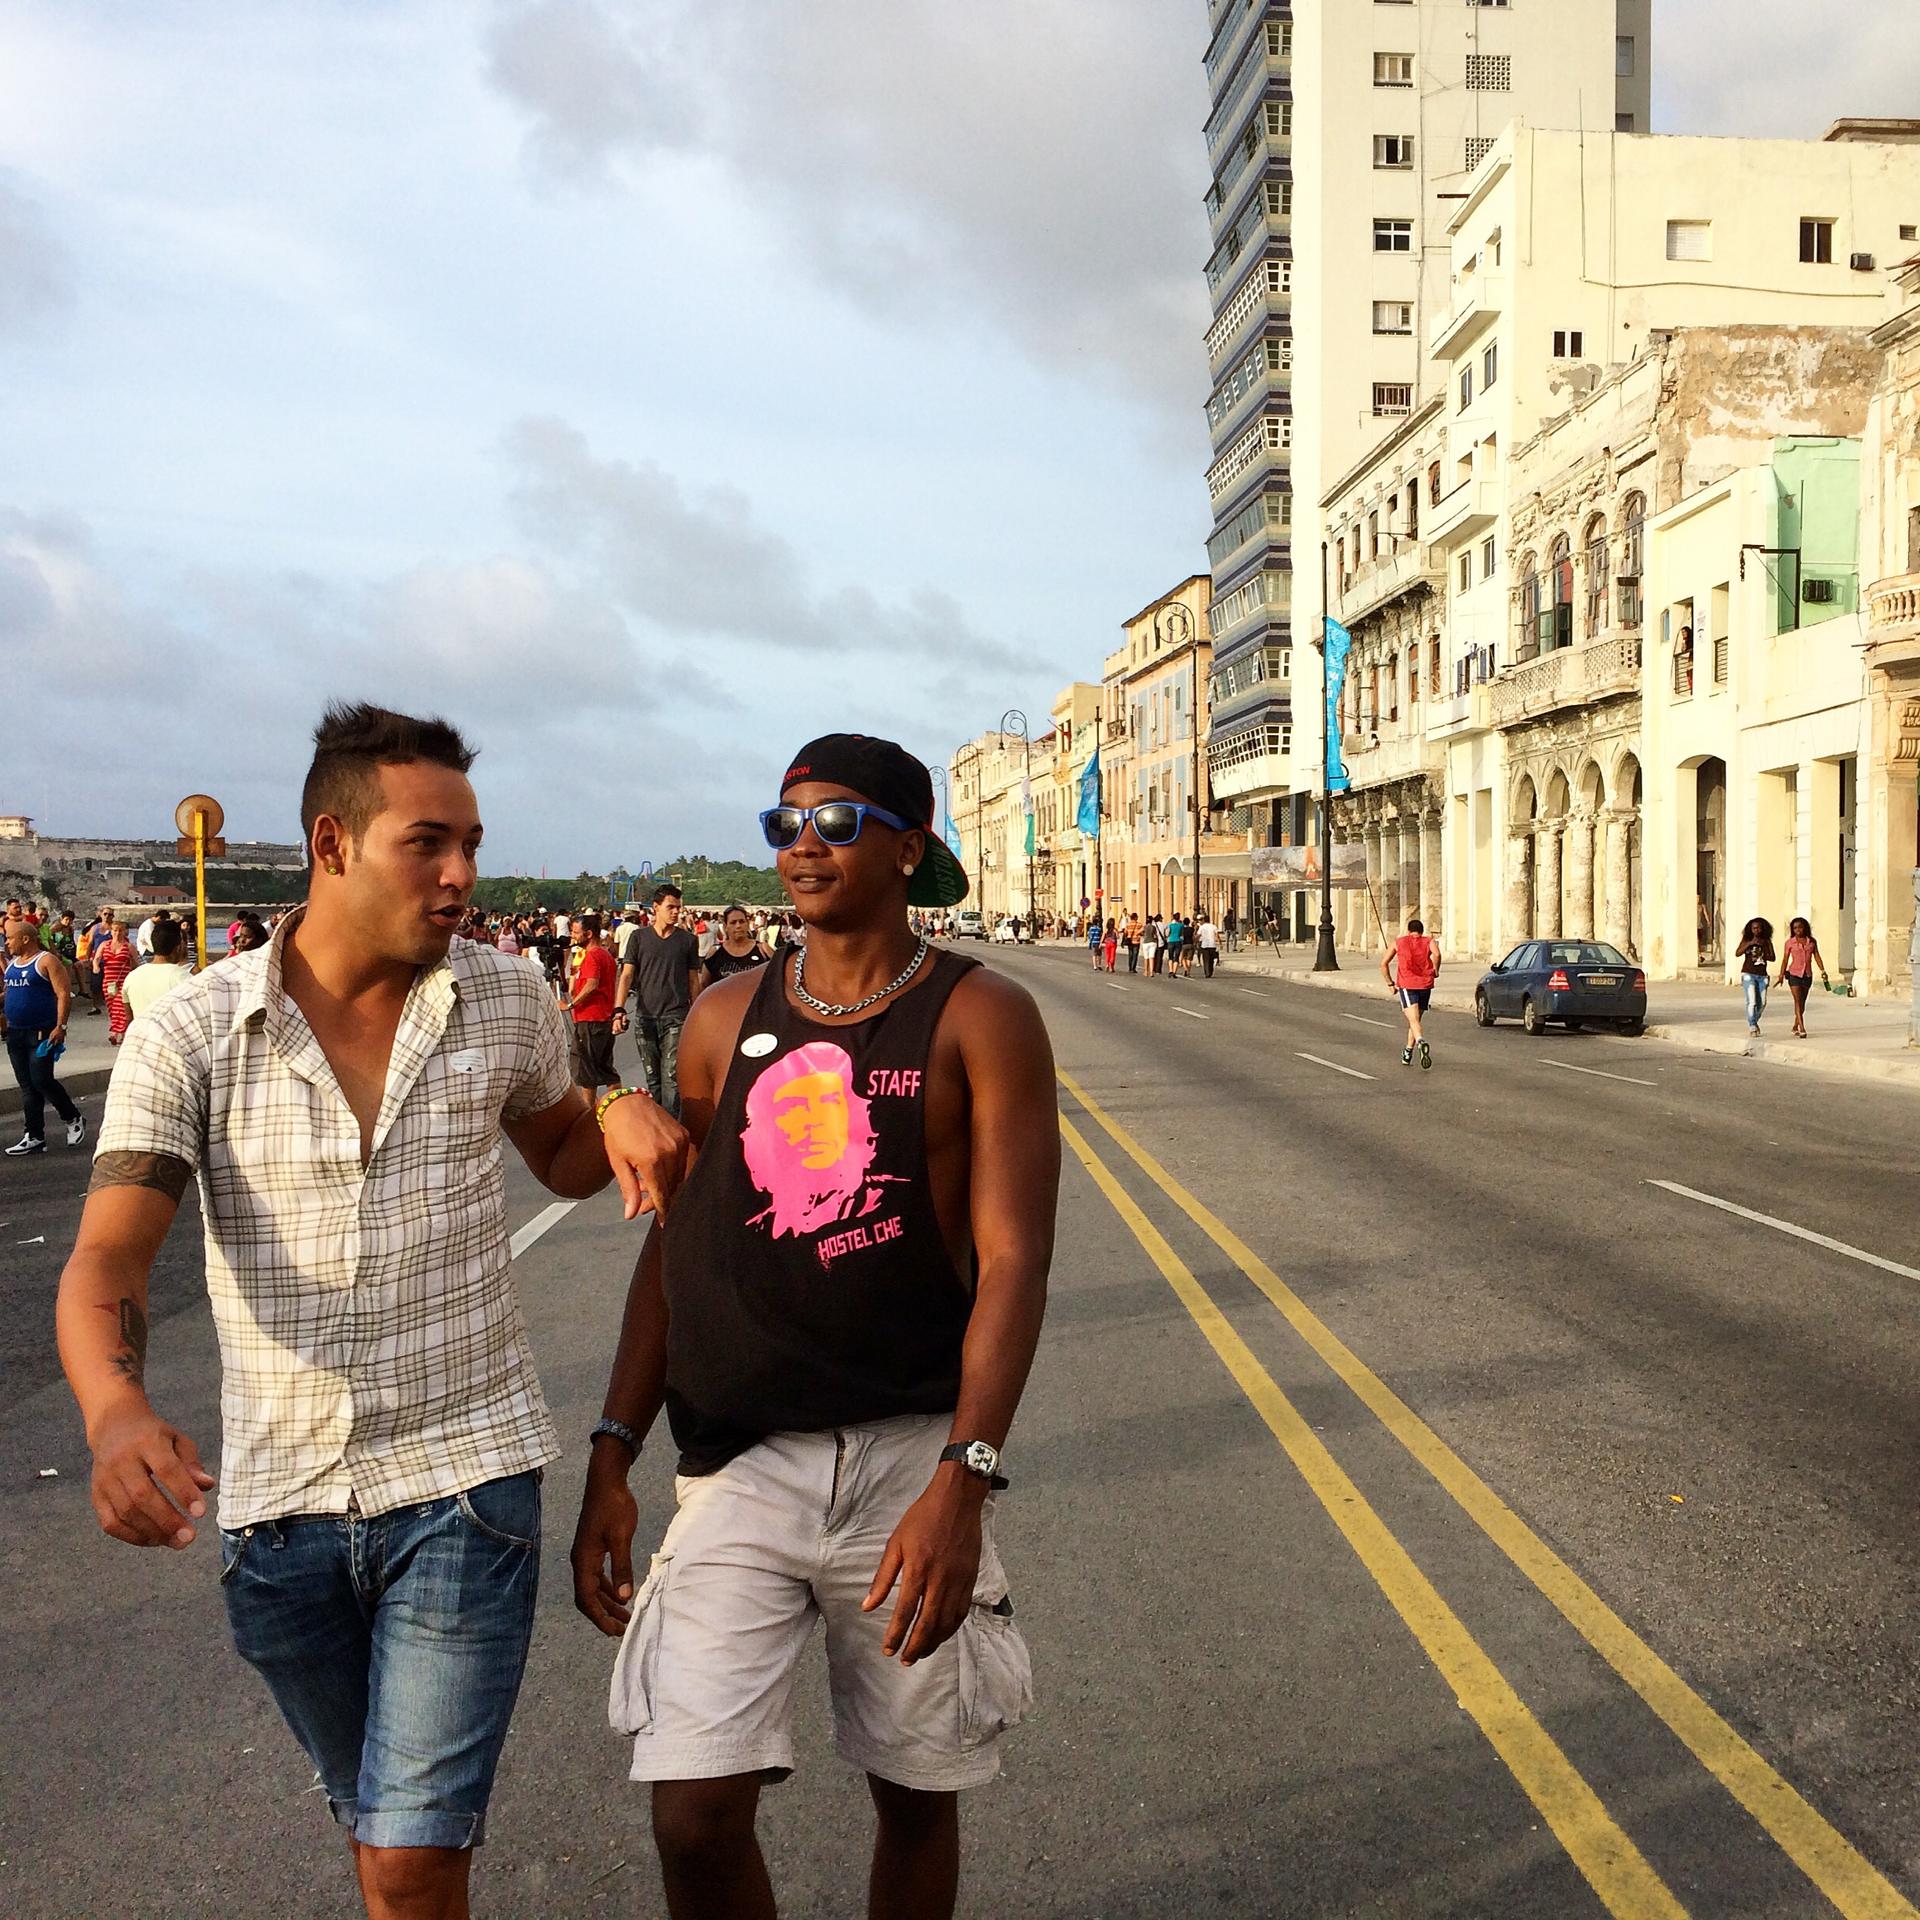 Opening weekend of the Havana Biennial, a stretch of the Malecón was closed to traffic. Only on rare occasions can pedestrians walk down Cuba's most famous sea-facing esplanade without cars.